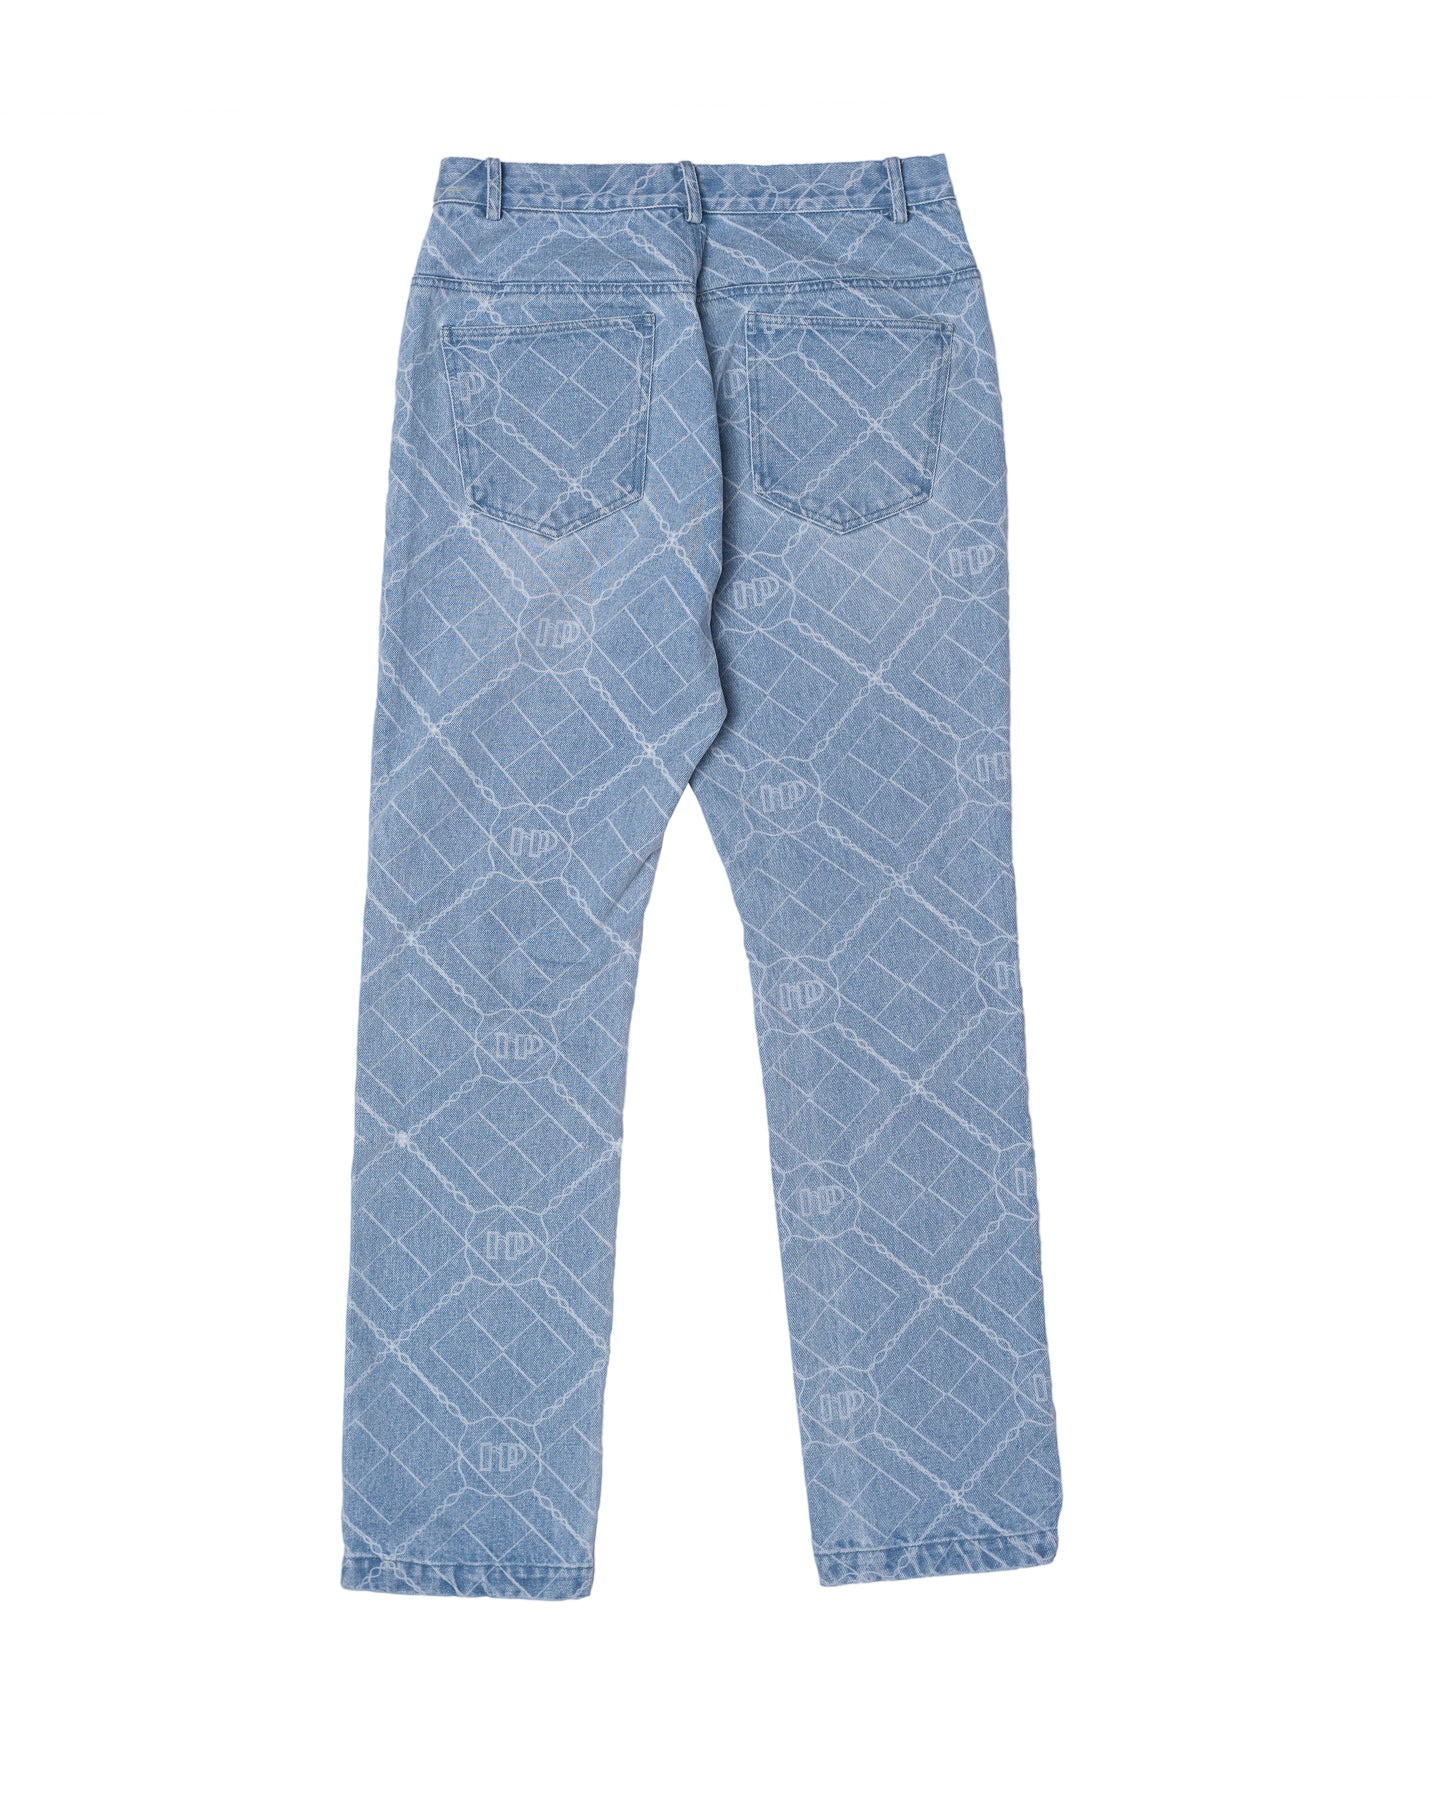 Horse Power - Horse Power Monogram Jeans - INTL Collective - Horse Power Clothing